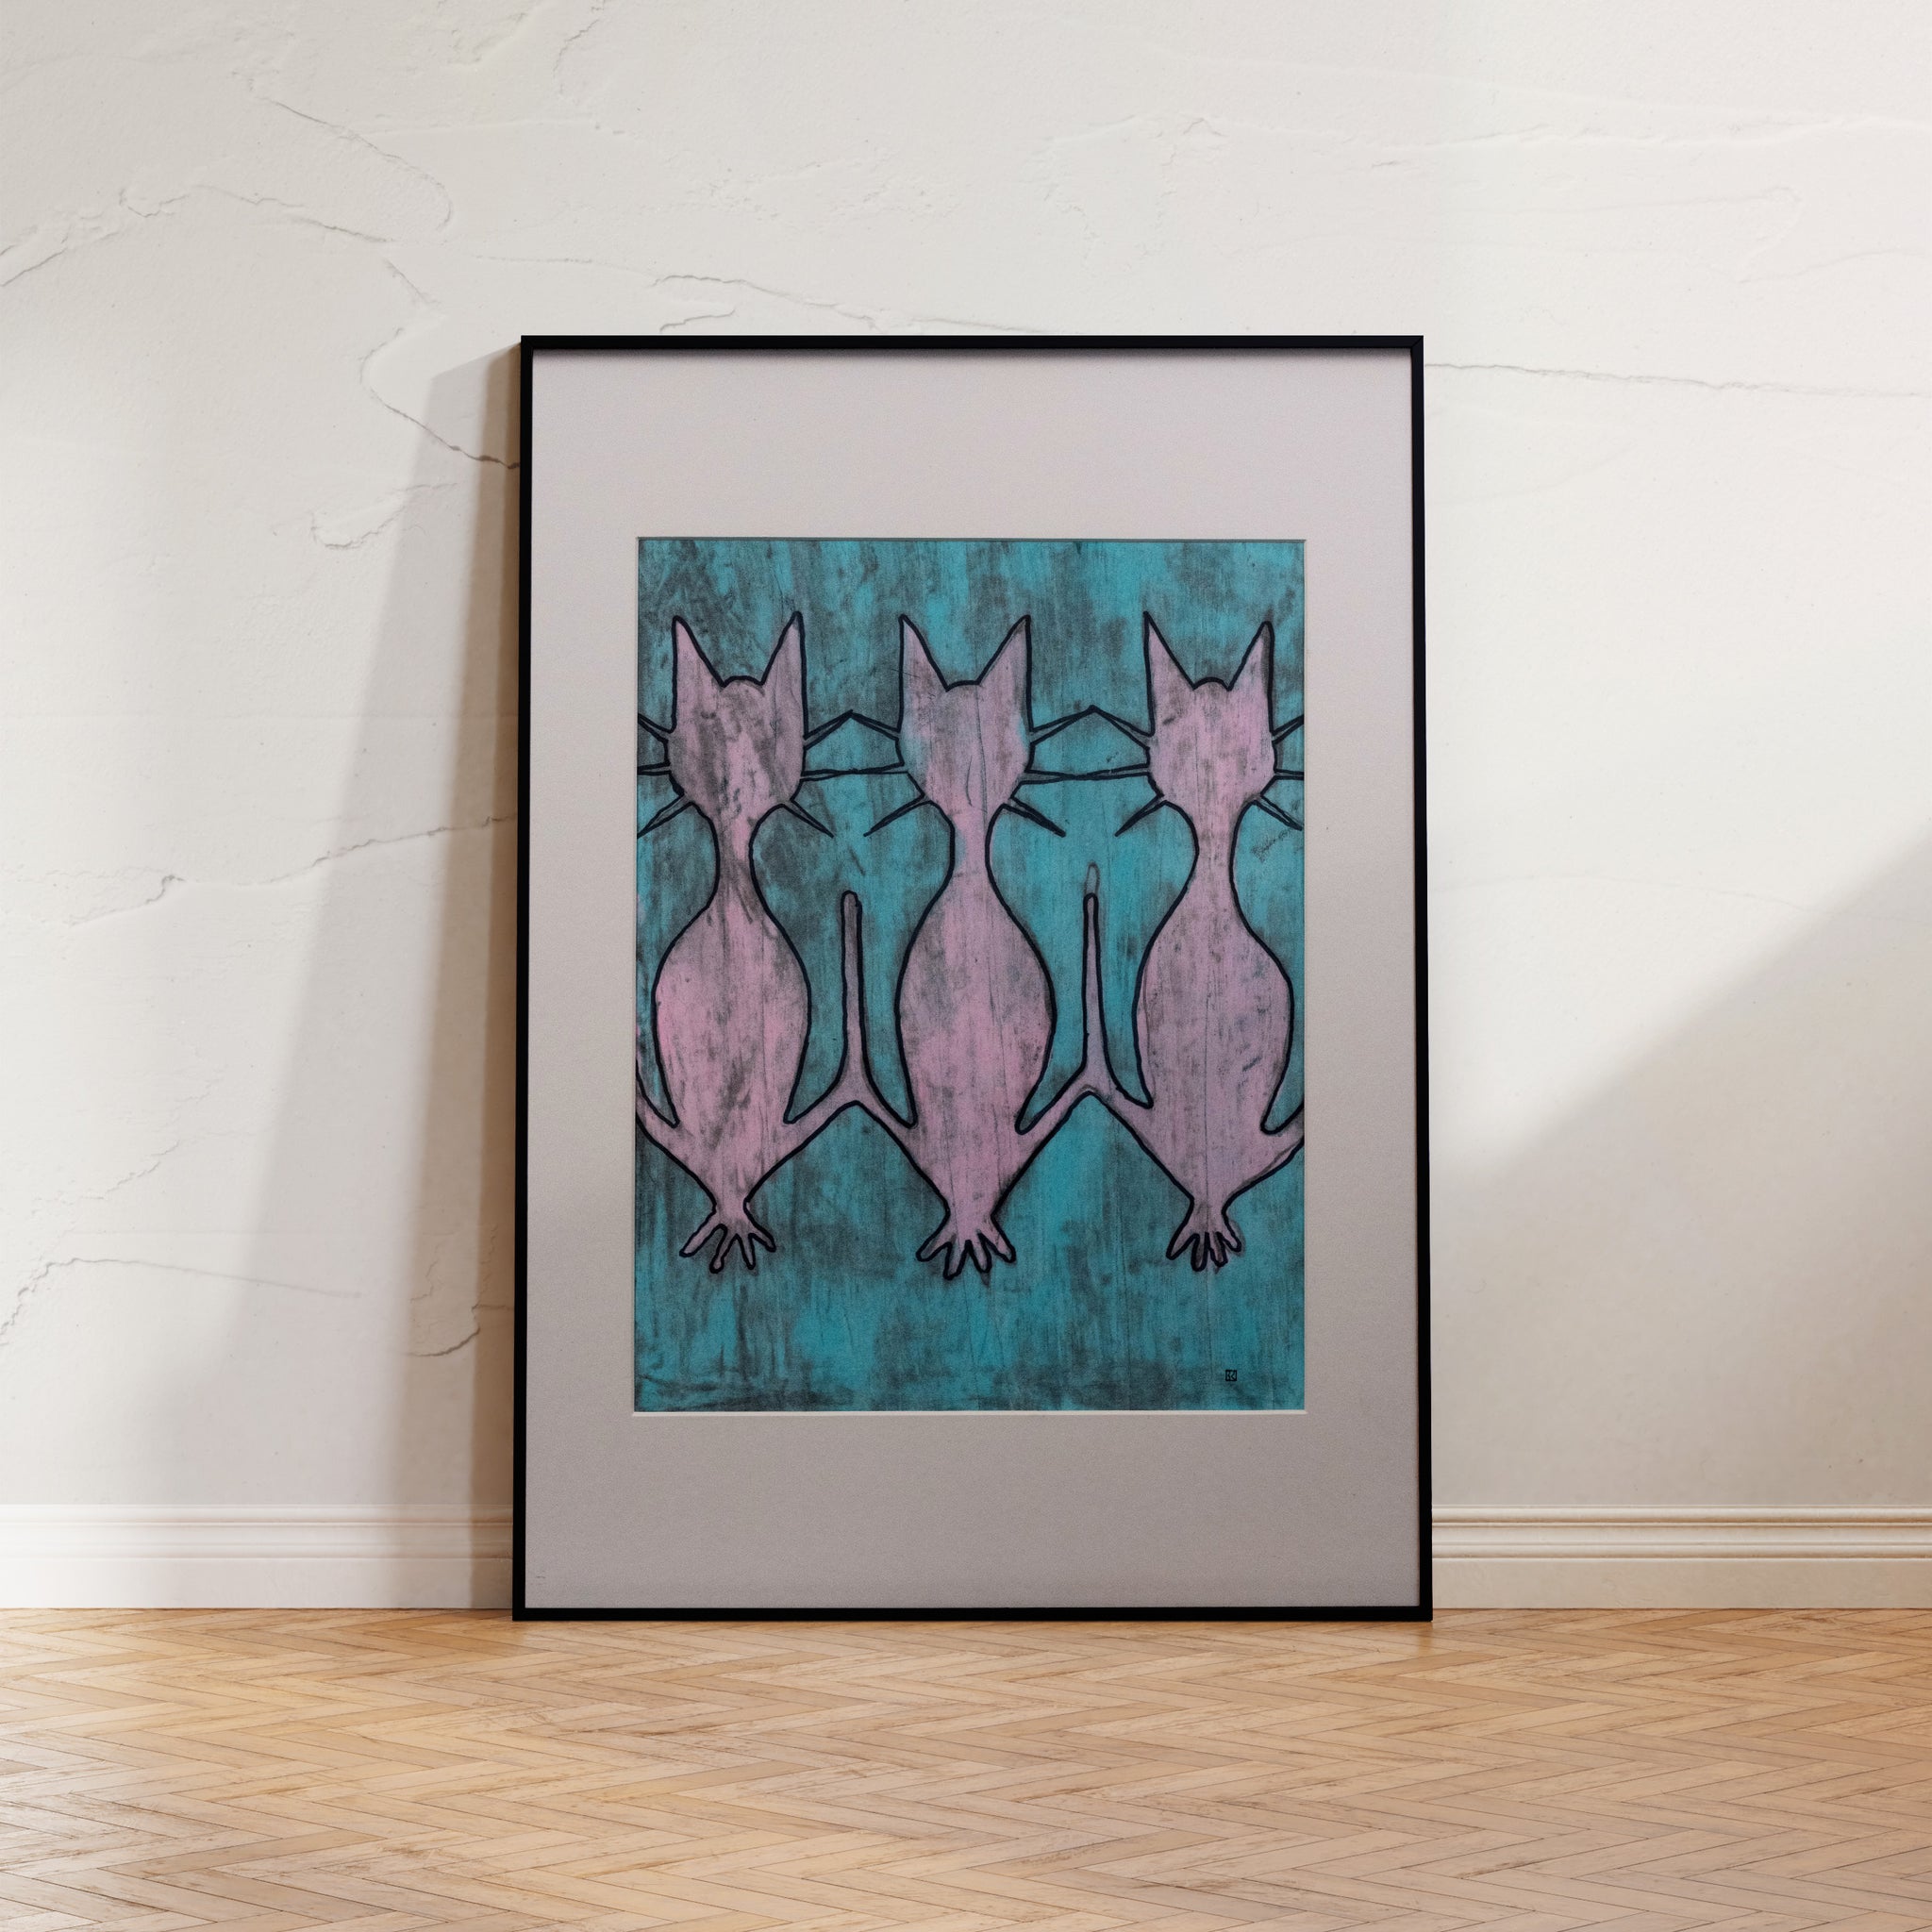 An enchanting art print showcasing three pink felines in a state of serene tranquility against a soft emerald backdrop, symbolizing wisdom and spiritual aura.